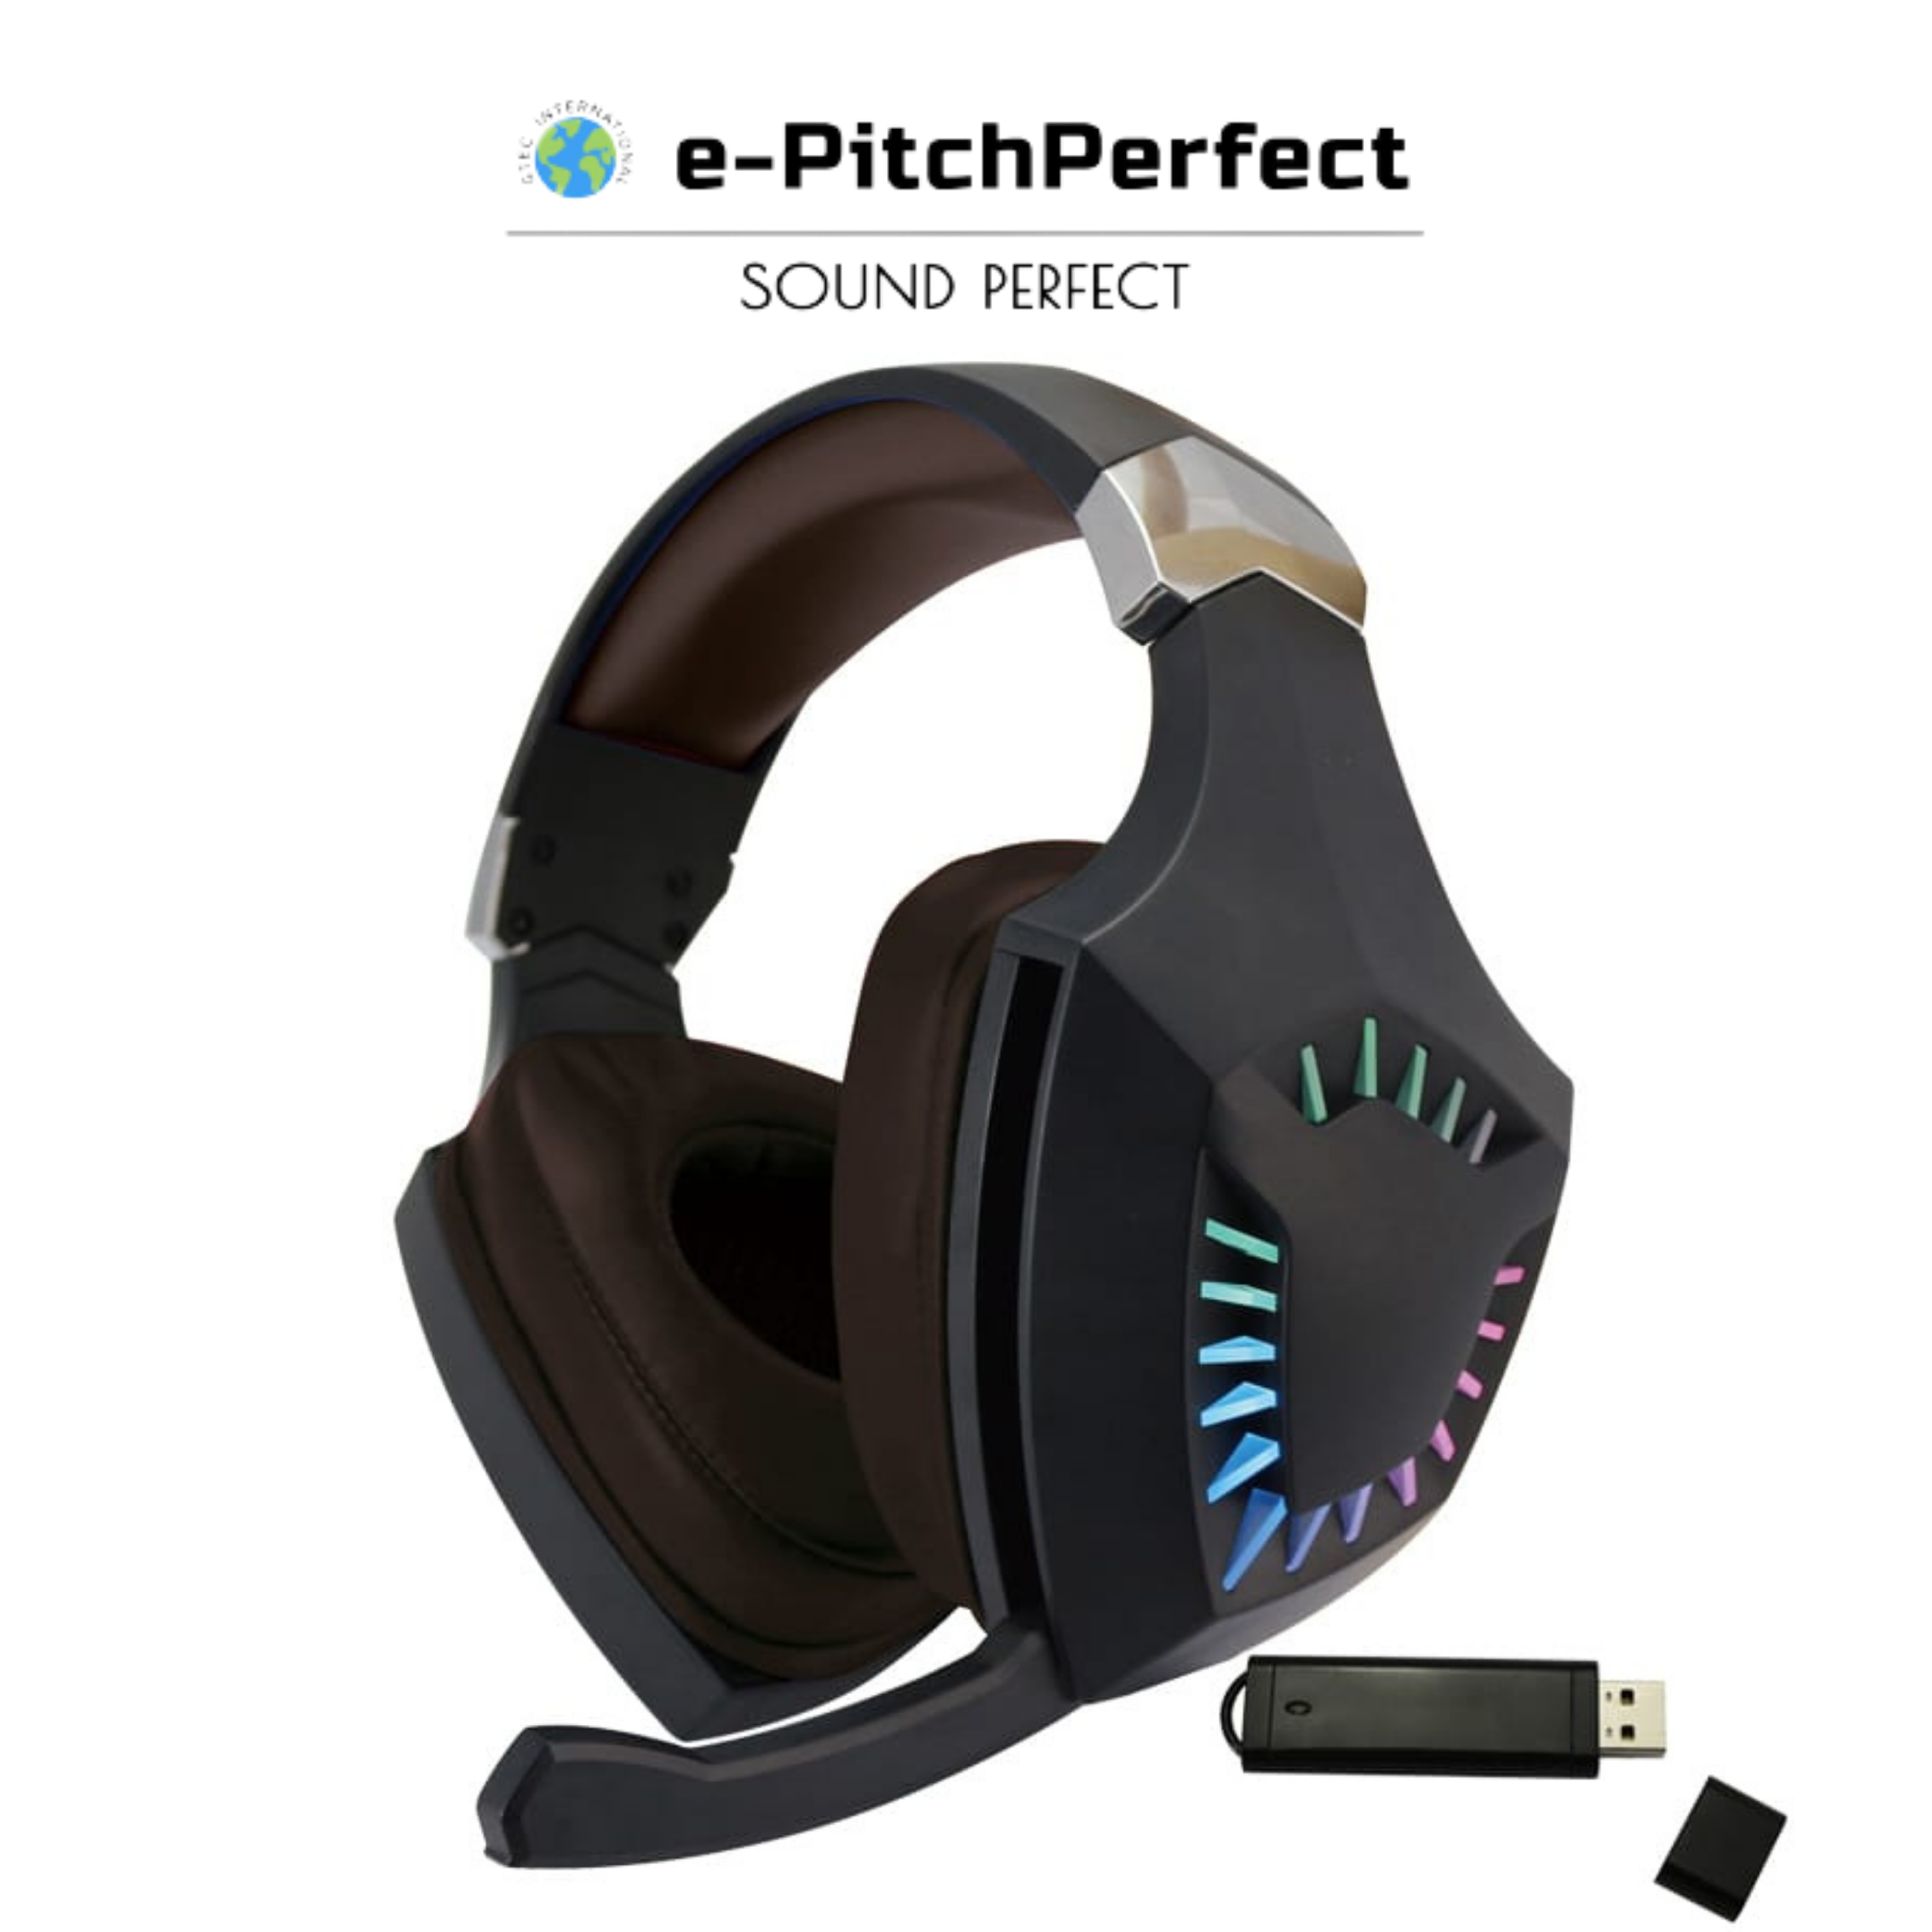 e-PitchPerfect e-PP 2.4Gワイヤレスゲーミングヘッドセット（マイク付き）PS4、Xbox One、ラップトップ、PC、iPhone、Androidフォンと互換性があります